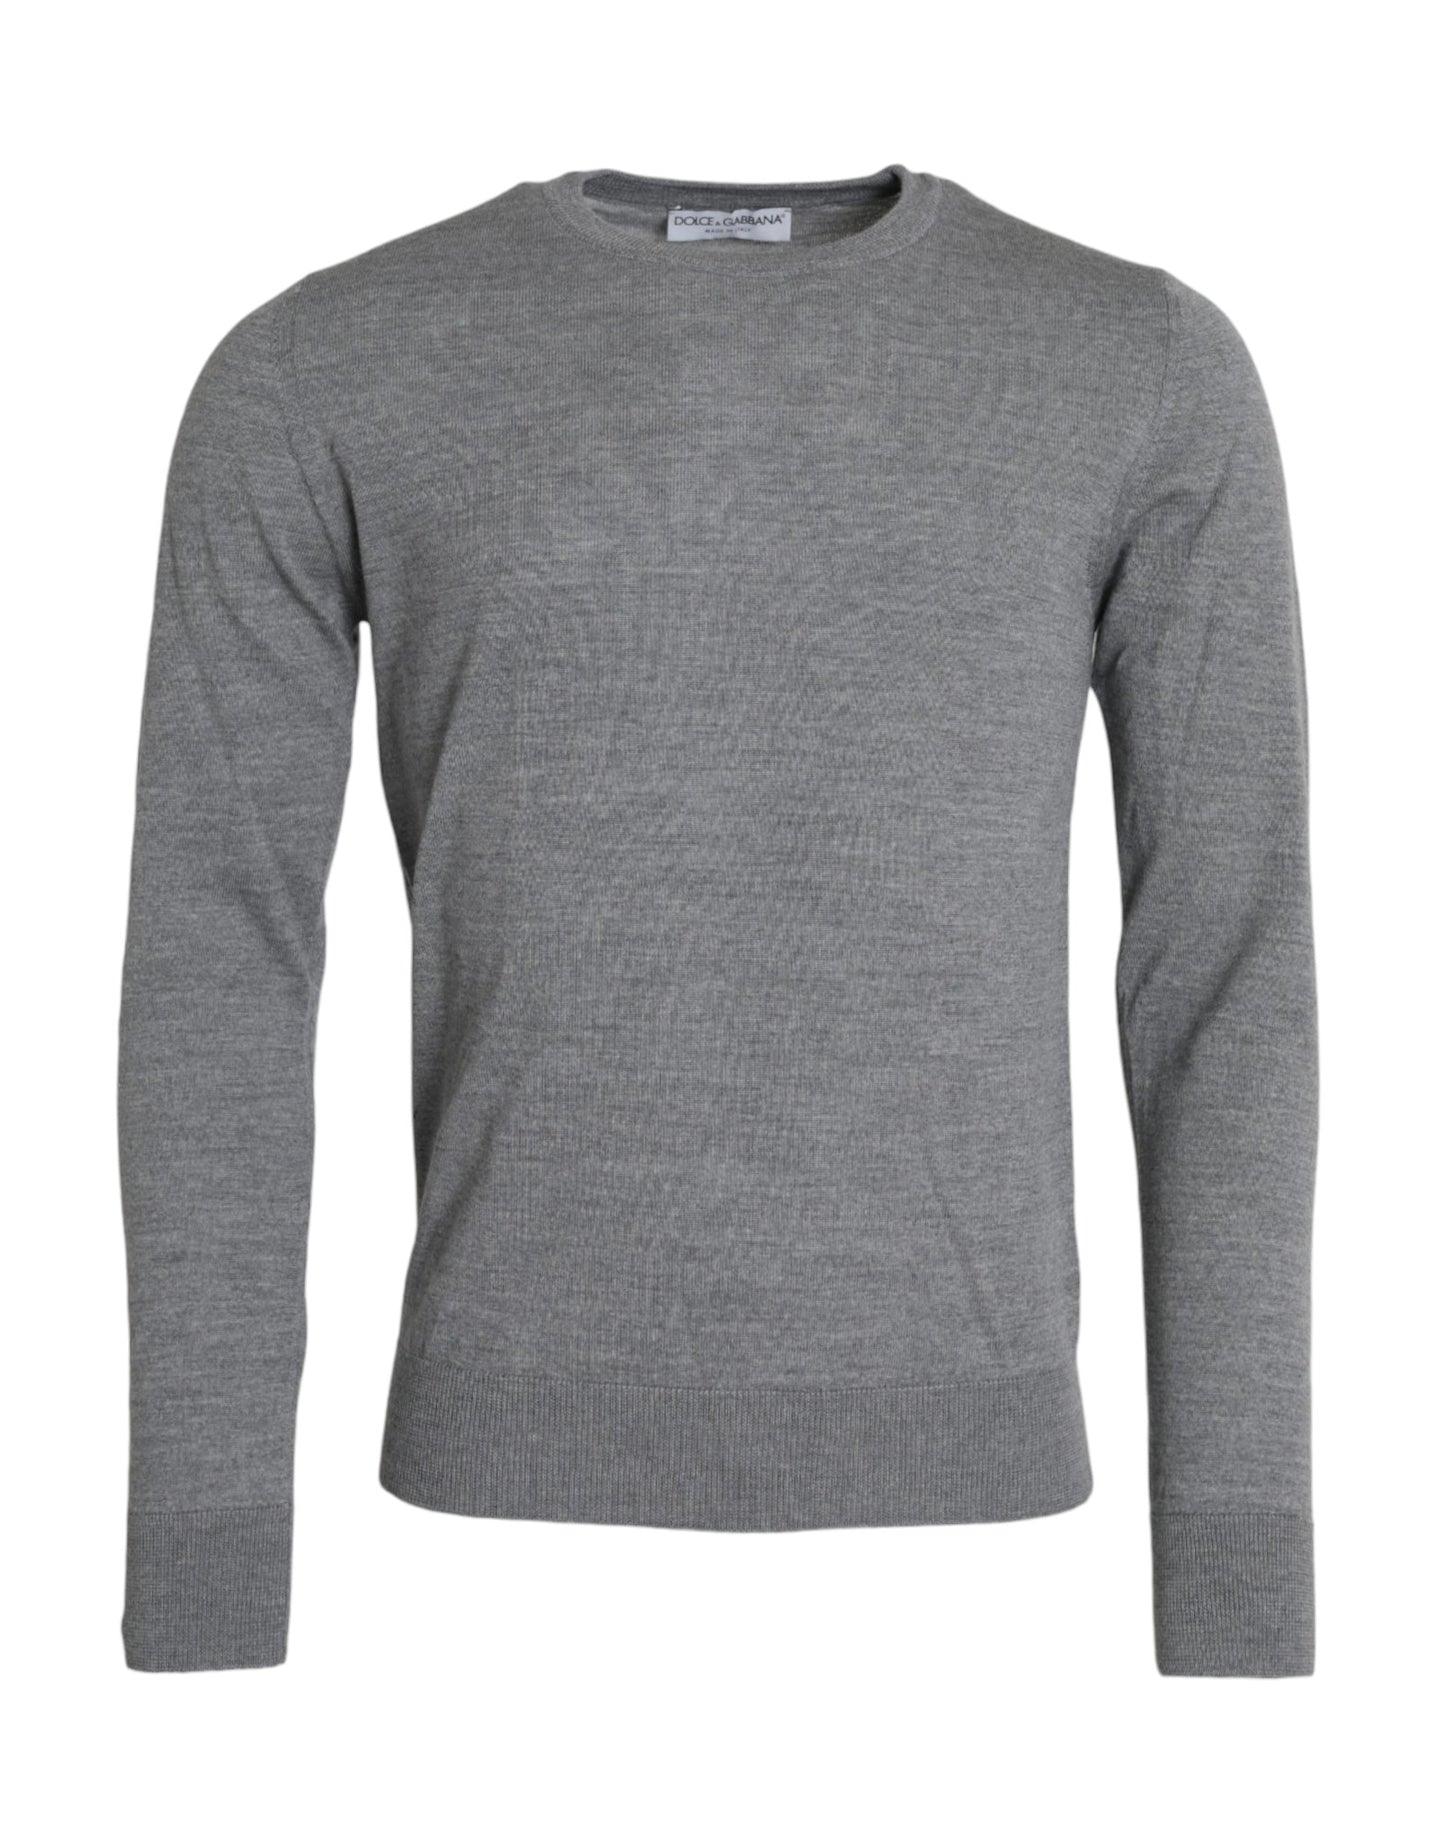 Ash Gray Wool Crew Neck Pullover Sweater